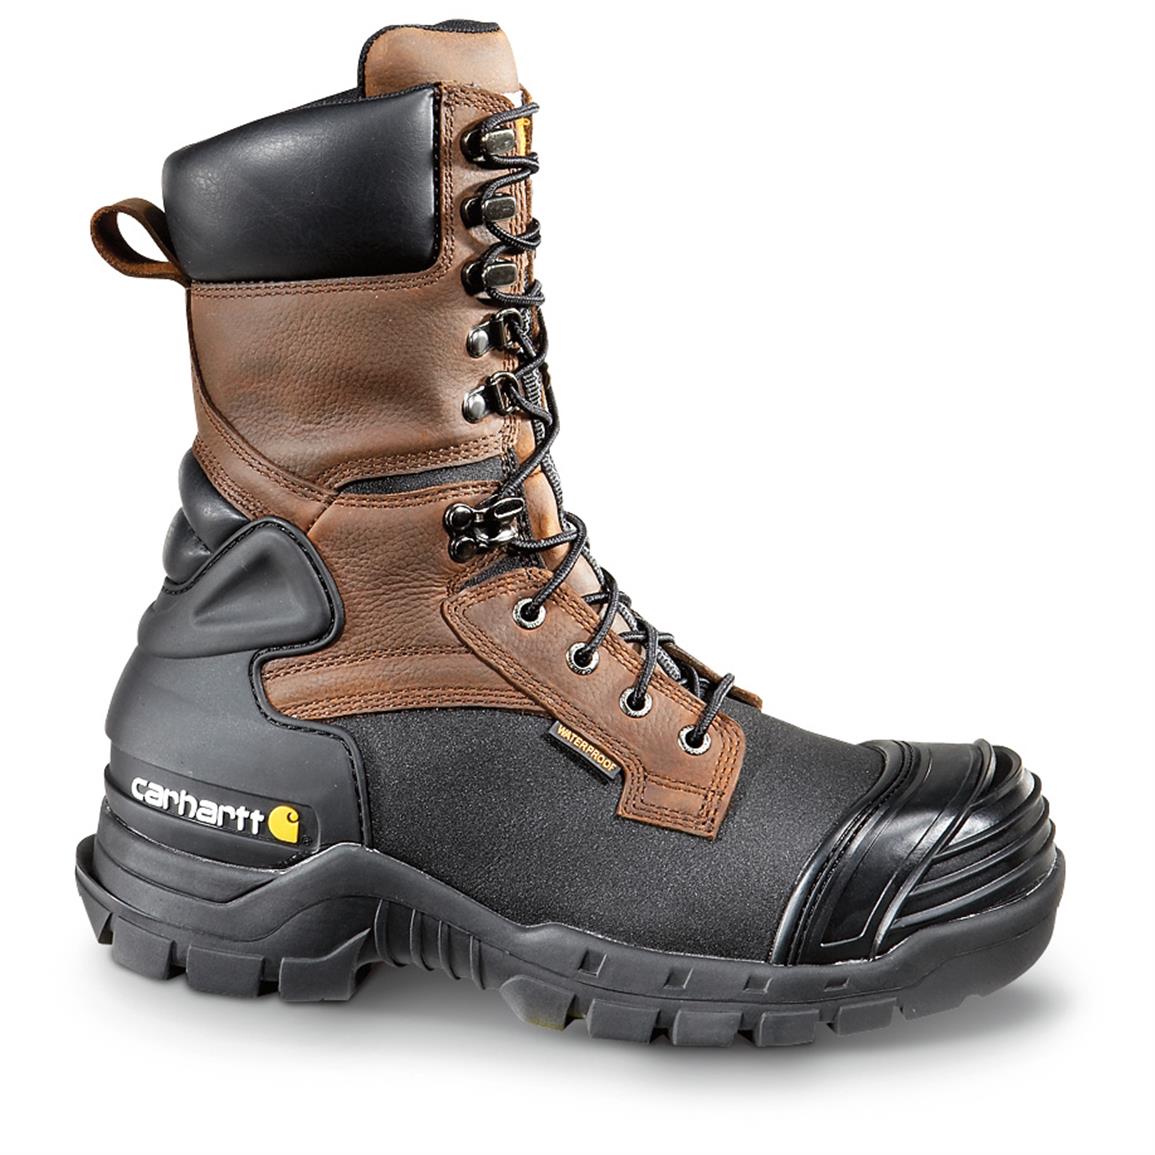 12 gram insulated composite toe work boots